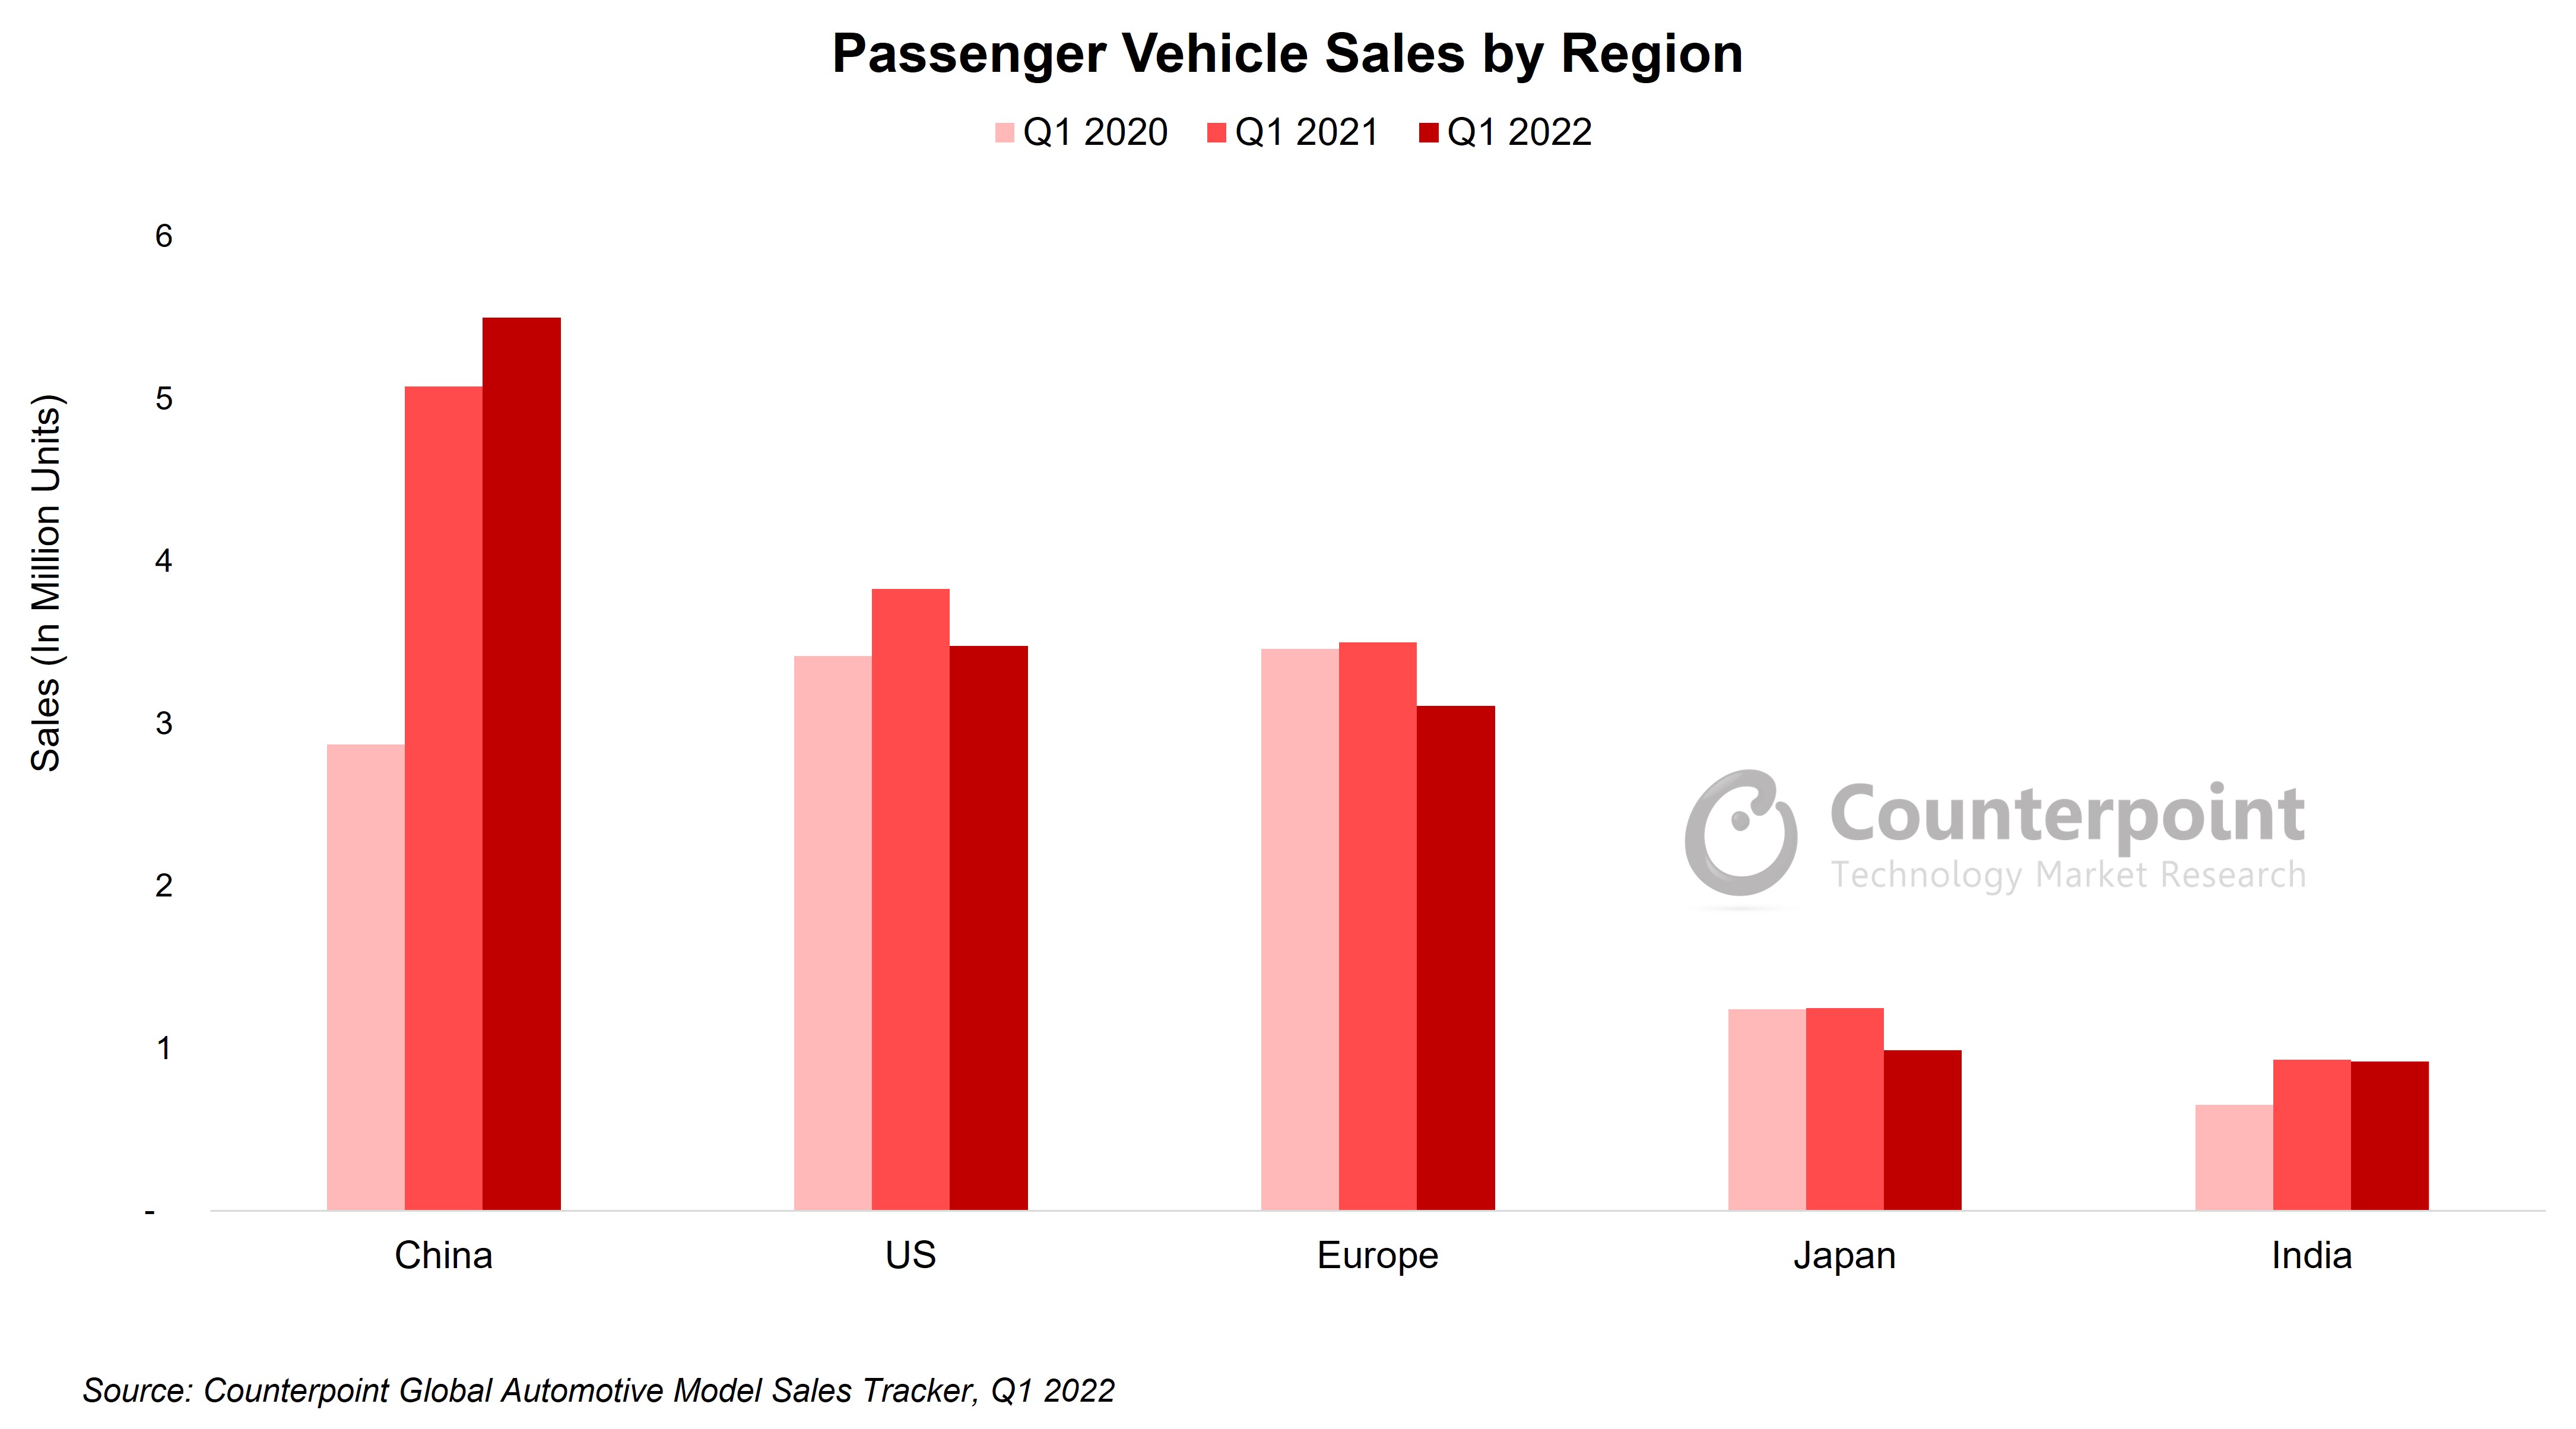 Passenger Vehicle Sales in Q1 2022 Counterpoint